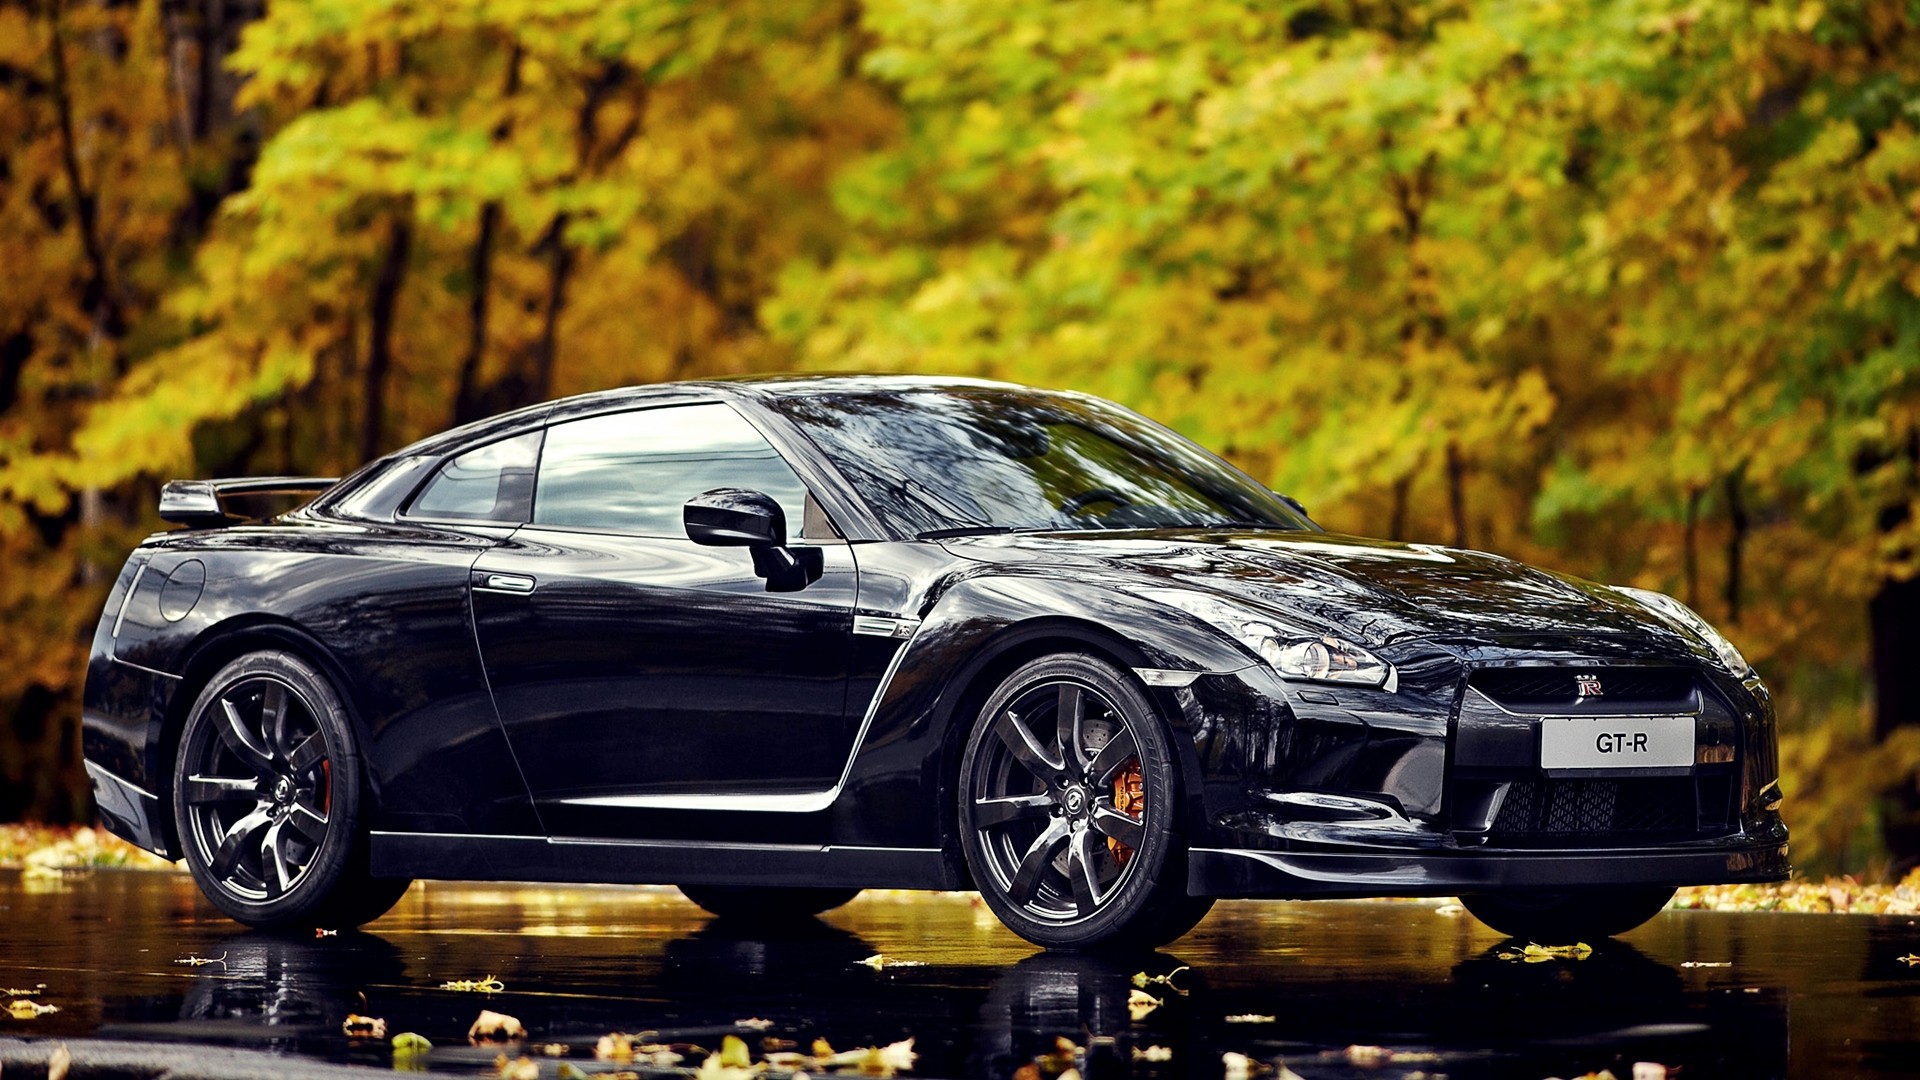 nature, Trees, Cars, Nissan, Nissan, R35, Gt r, Nissan, Skyline, R35, Gt r, Nissan, Gtr, Nissan, Gtr35 Wallpaper